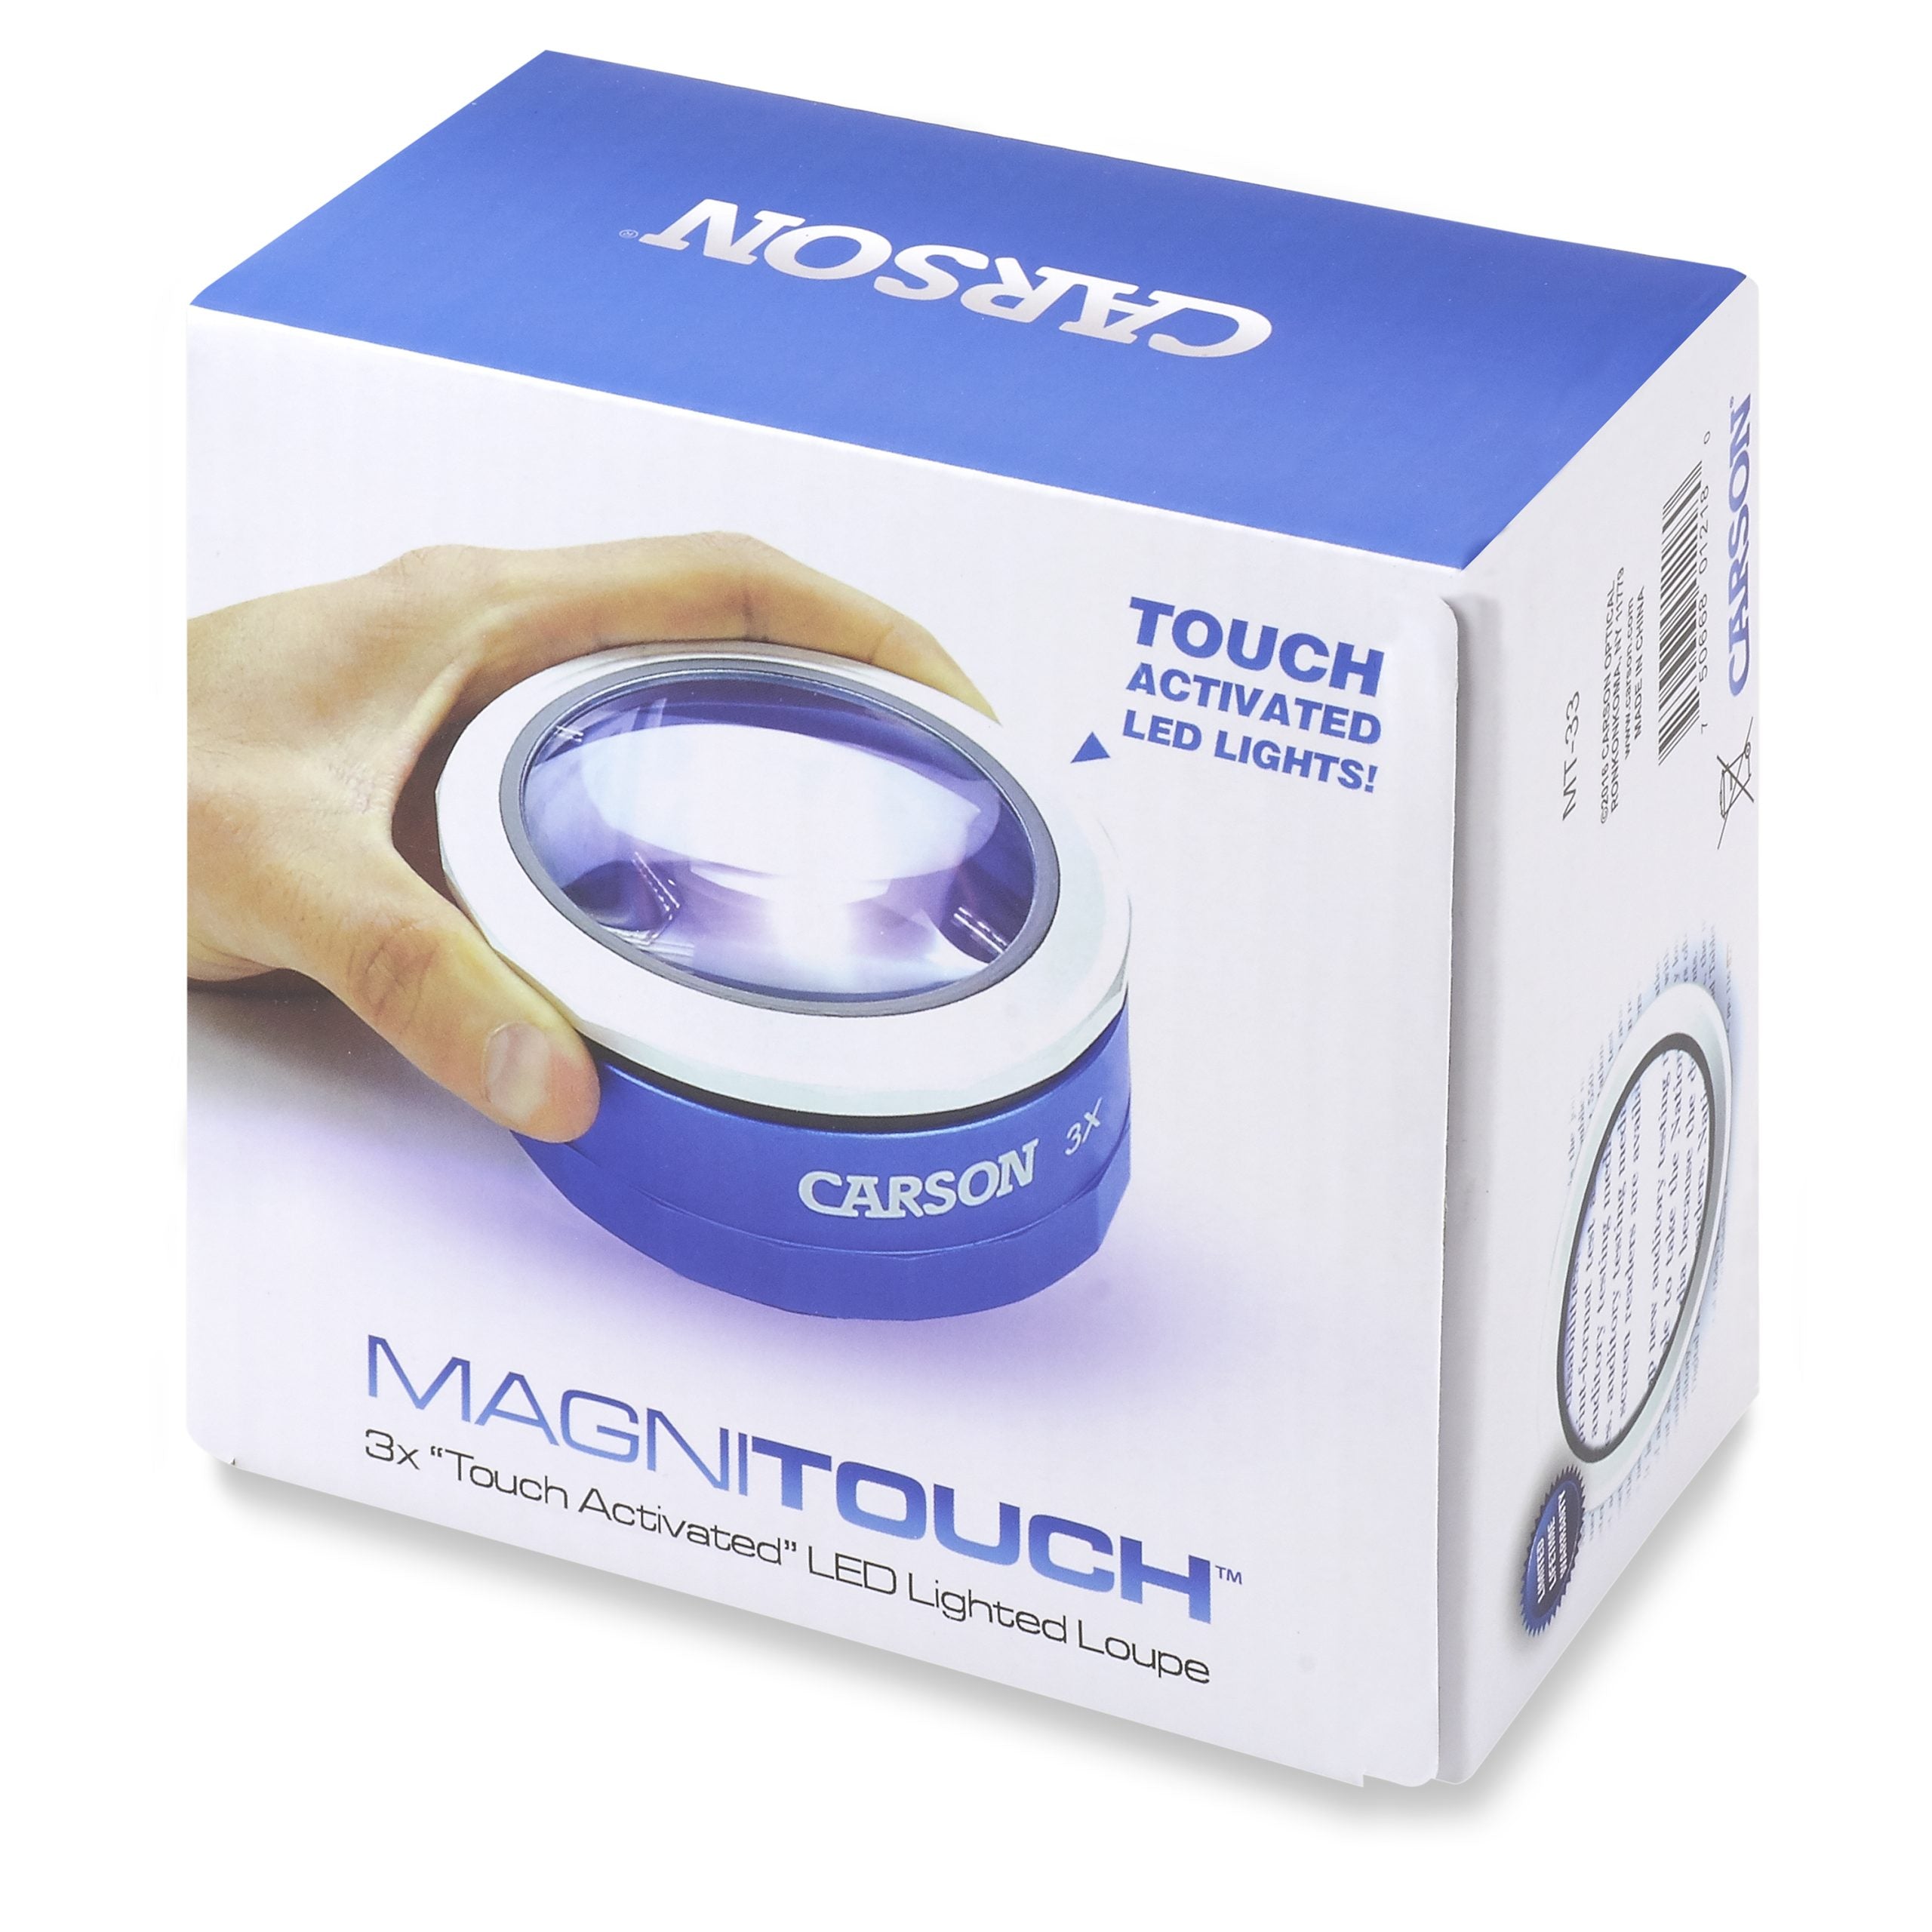 MagniTouch 3x Touch Activated LED Lit Focusable Stand Loupe Magnifier